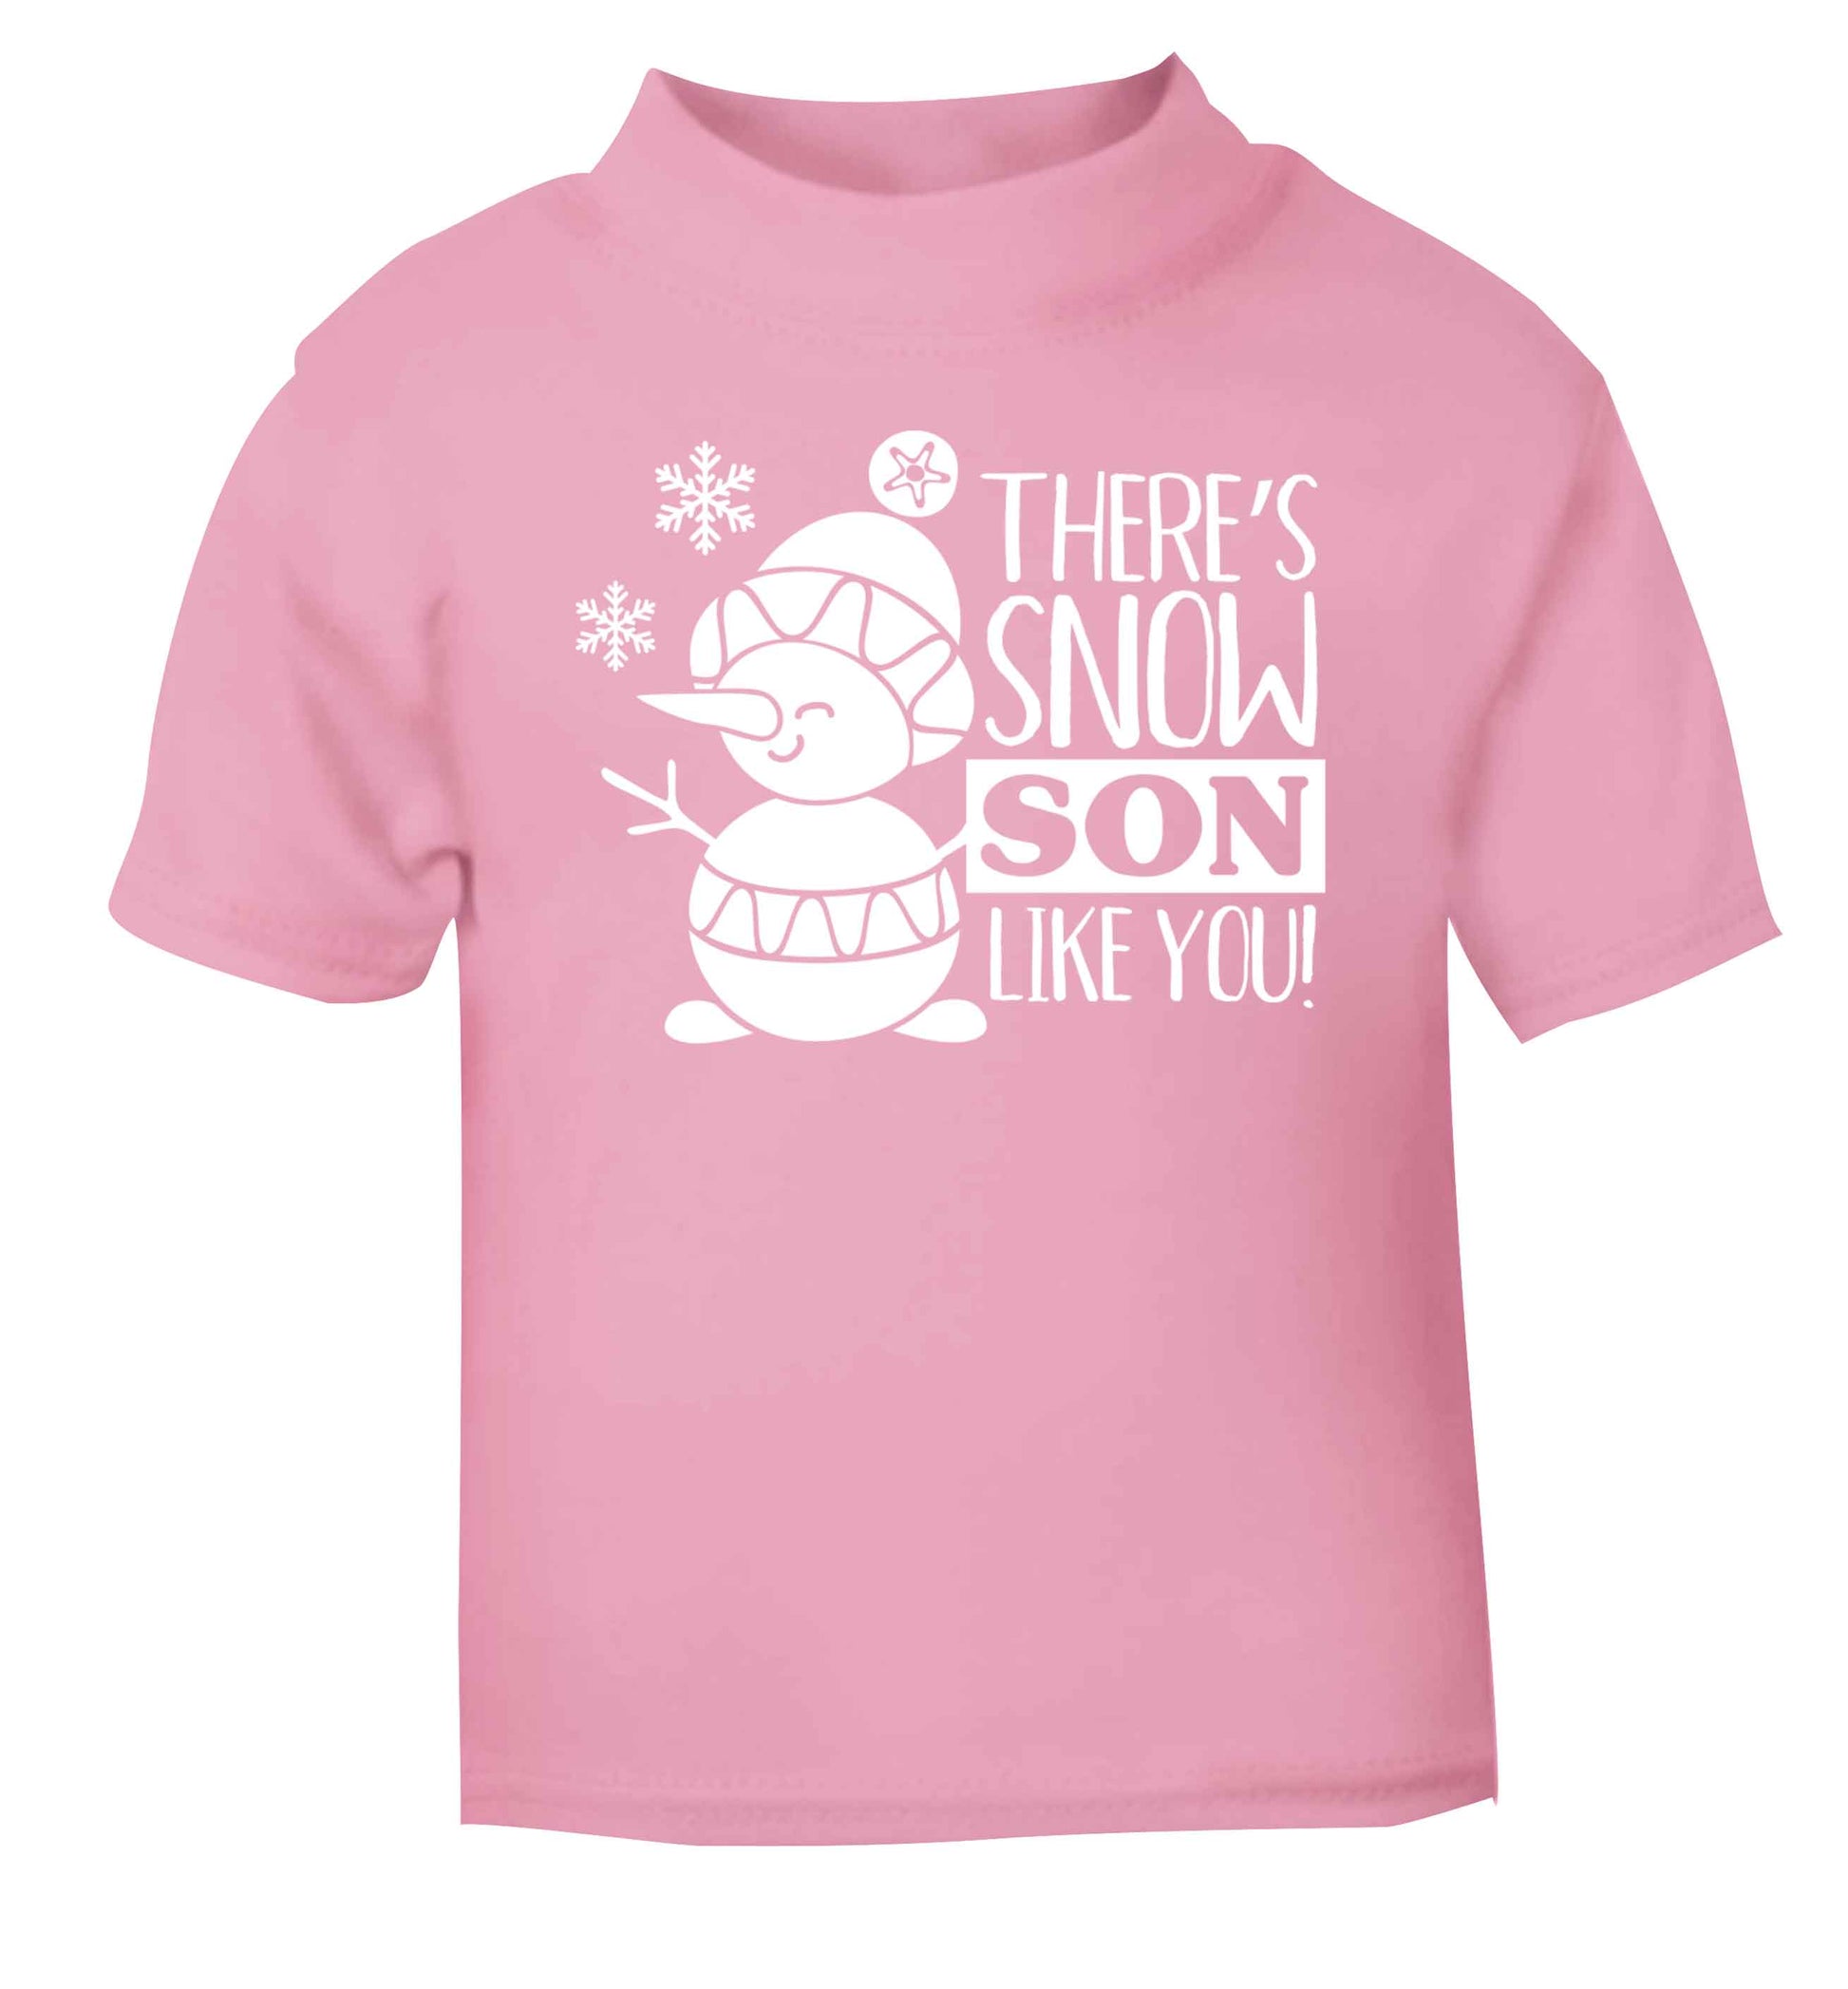 There's snow son like you light pink baby toddler Tshirt 2 Years